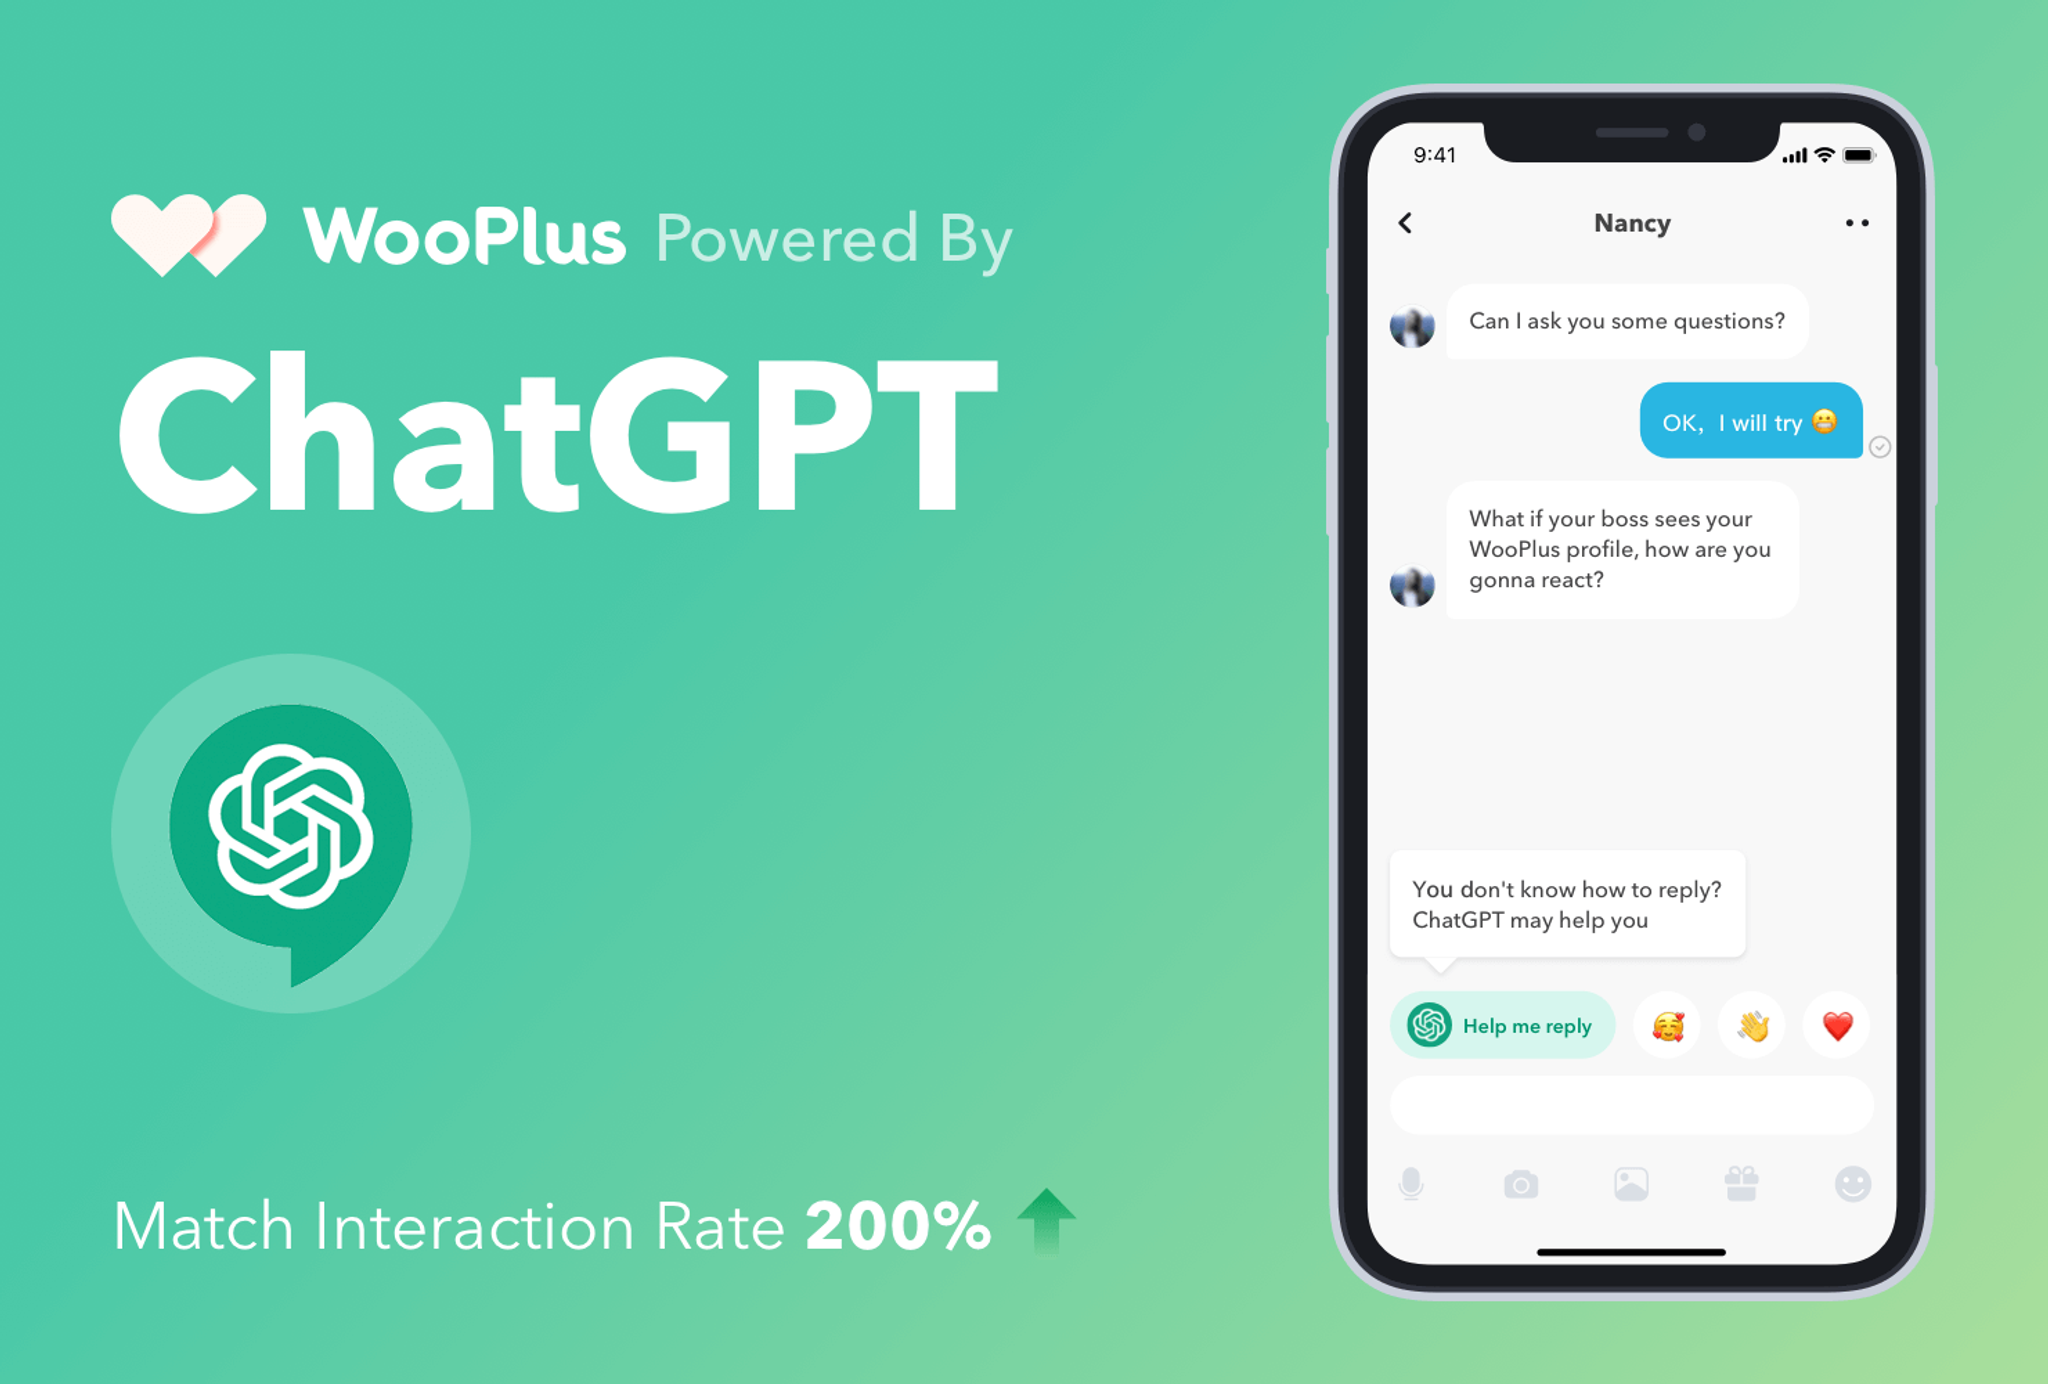 WooPlus Integrated ChatGPT to Help You Date, Boosted Match Interaction by 200%￼